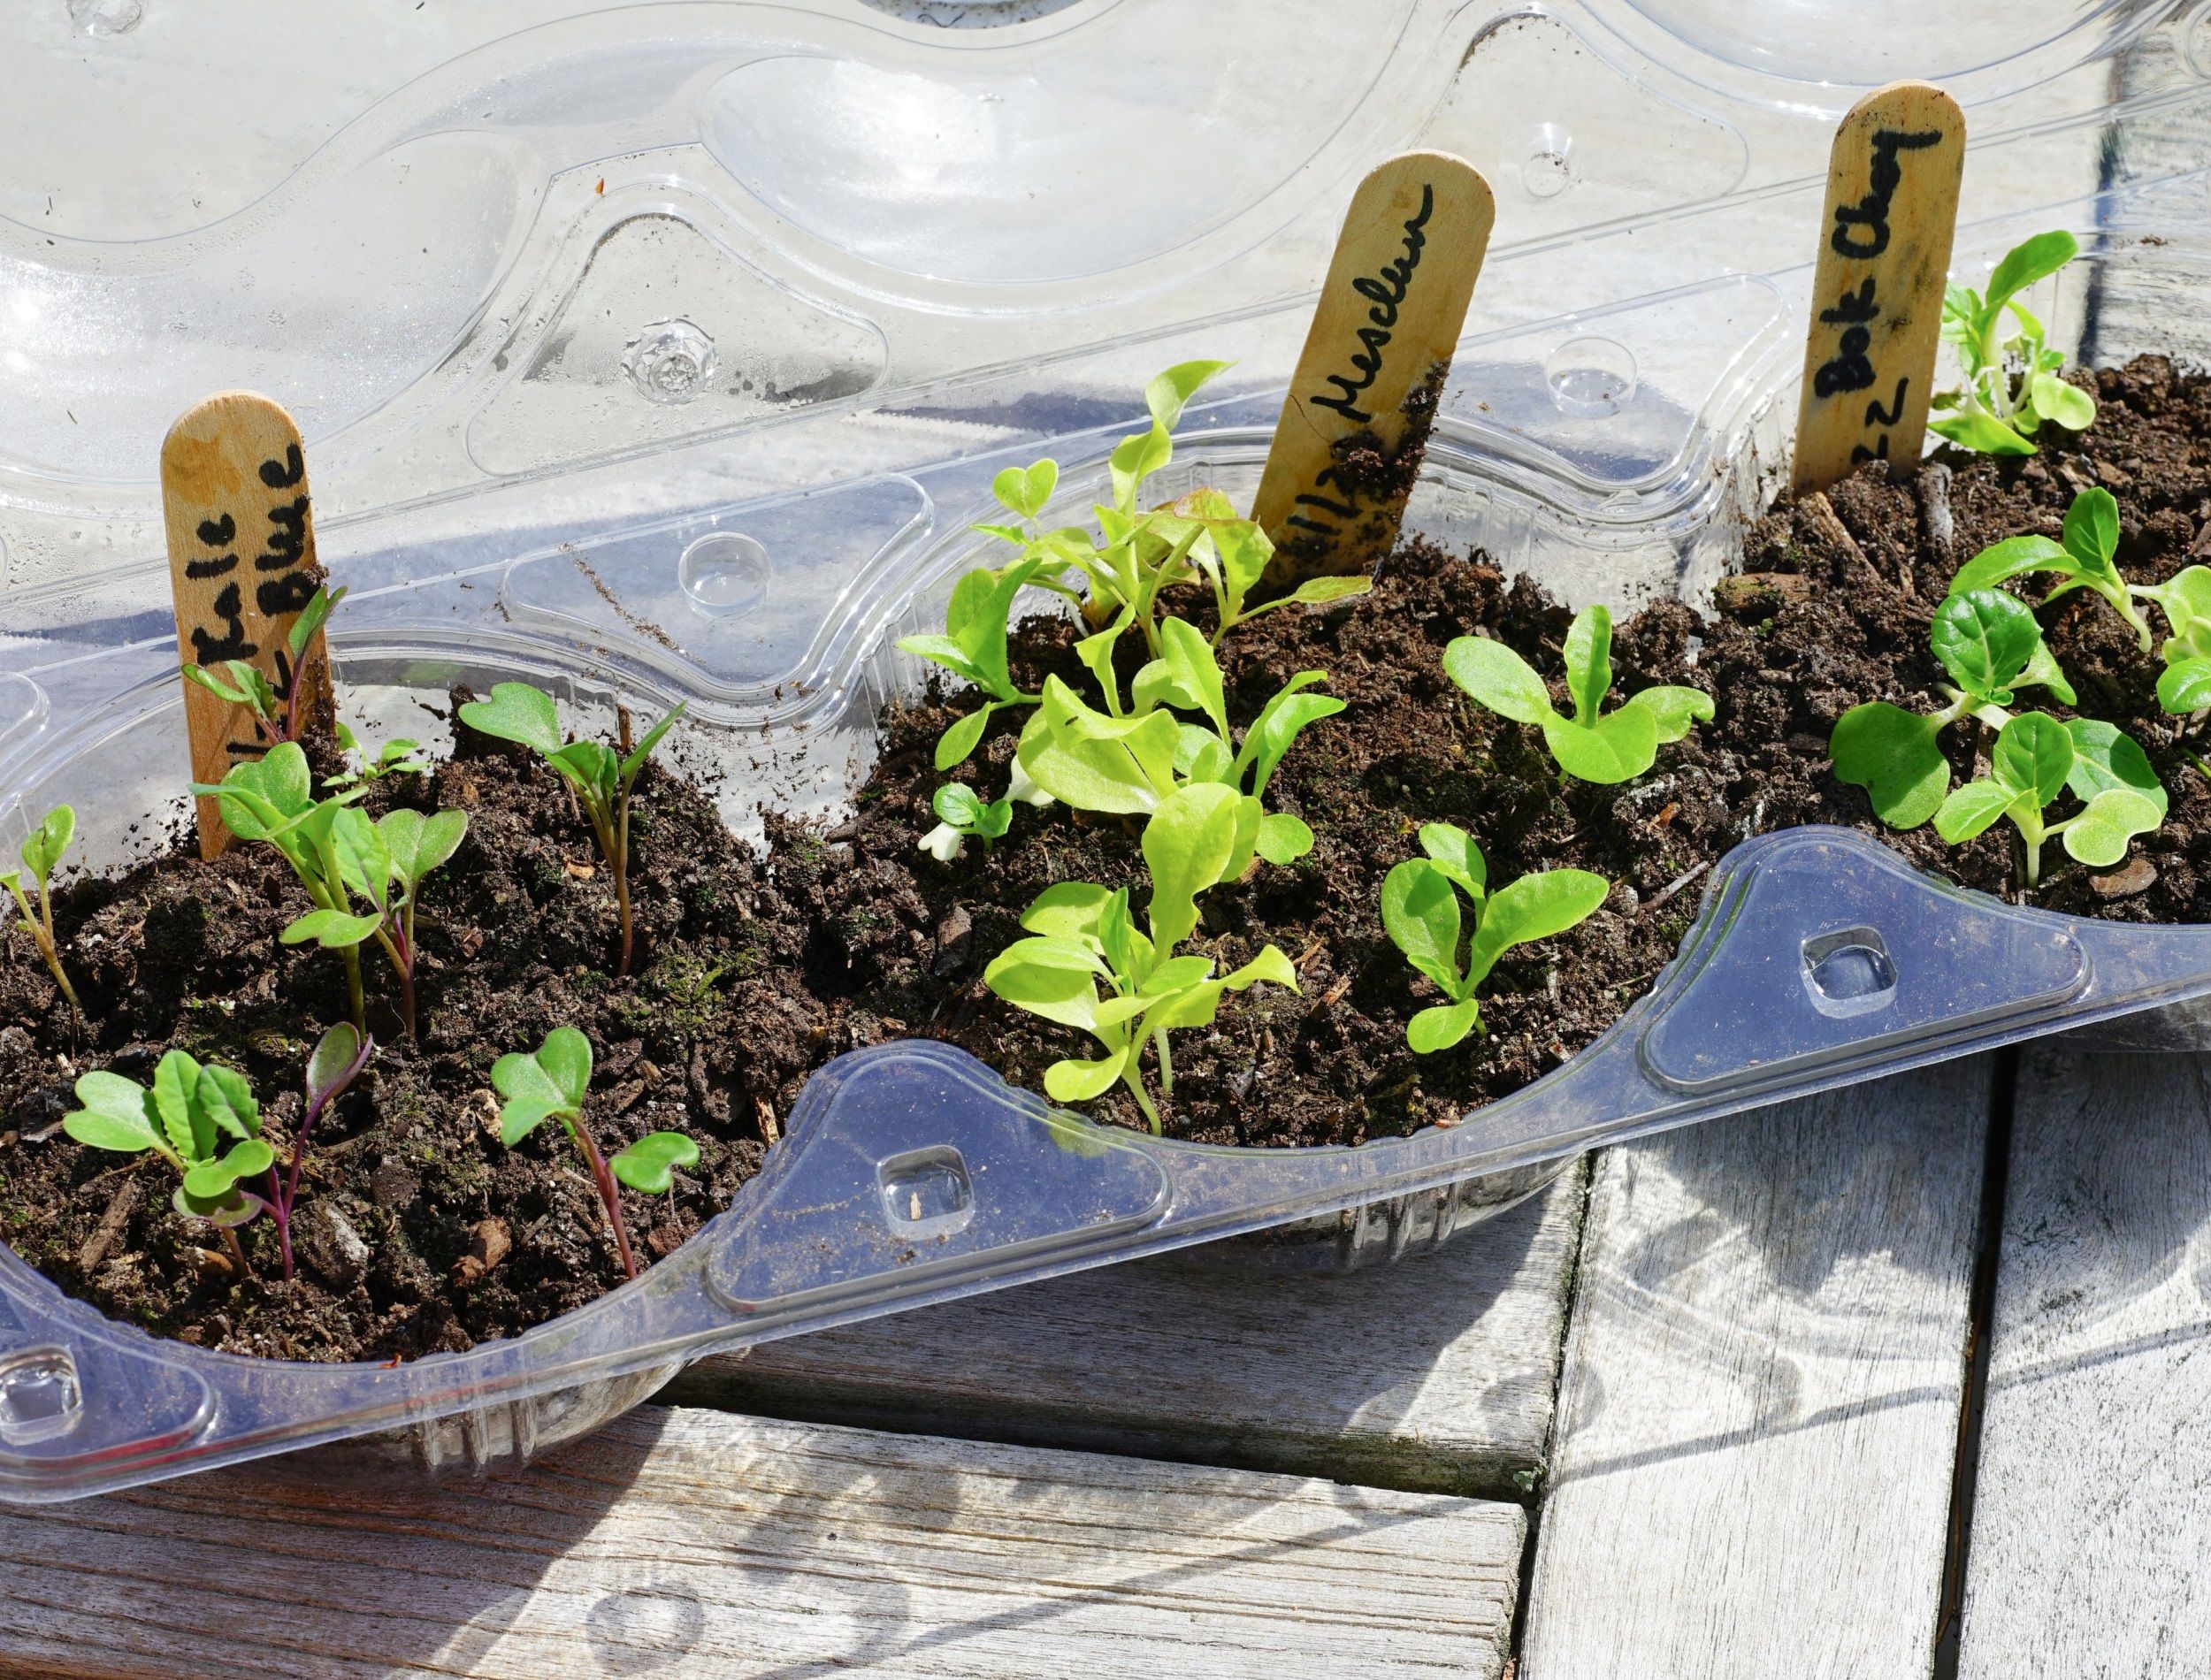 Winter sowing seeds in plastic salad containers